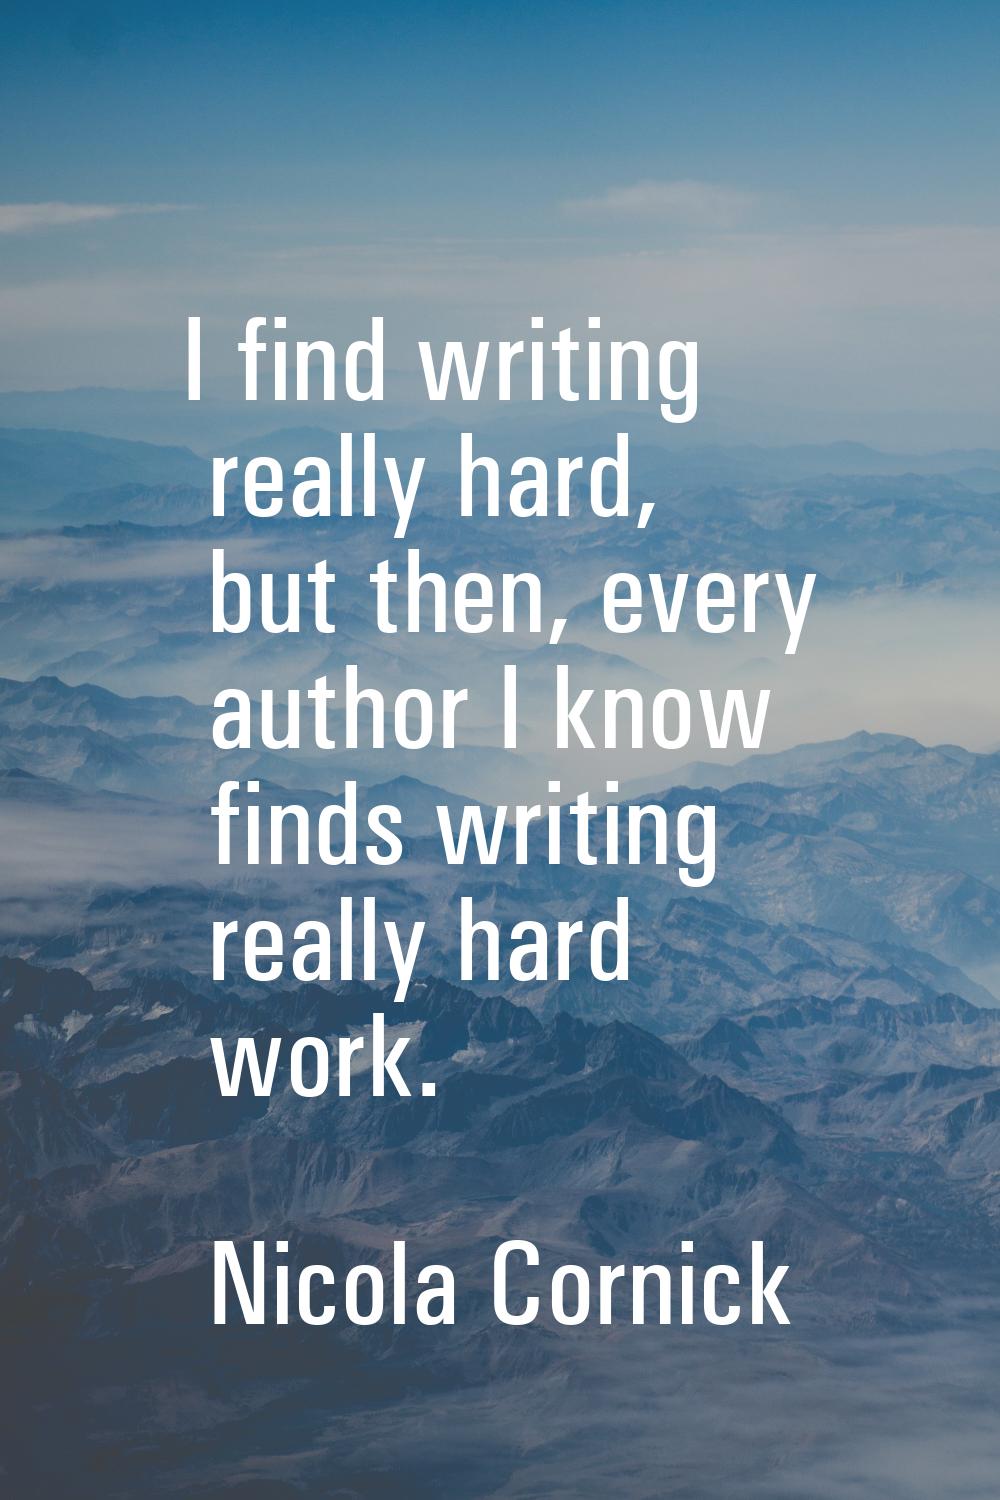 I find writing really hard, but then, every author I know finds writing really hard work.